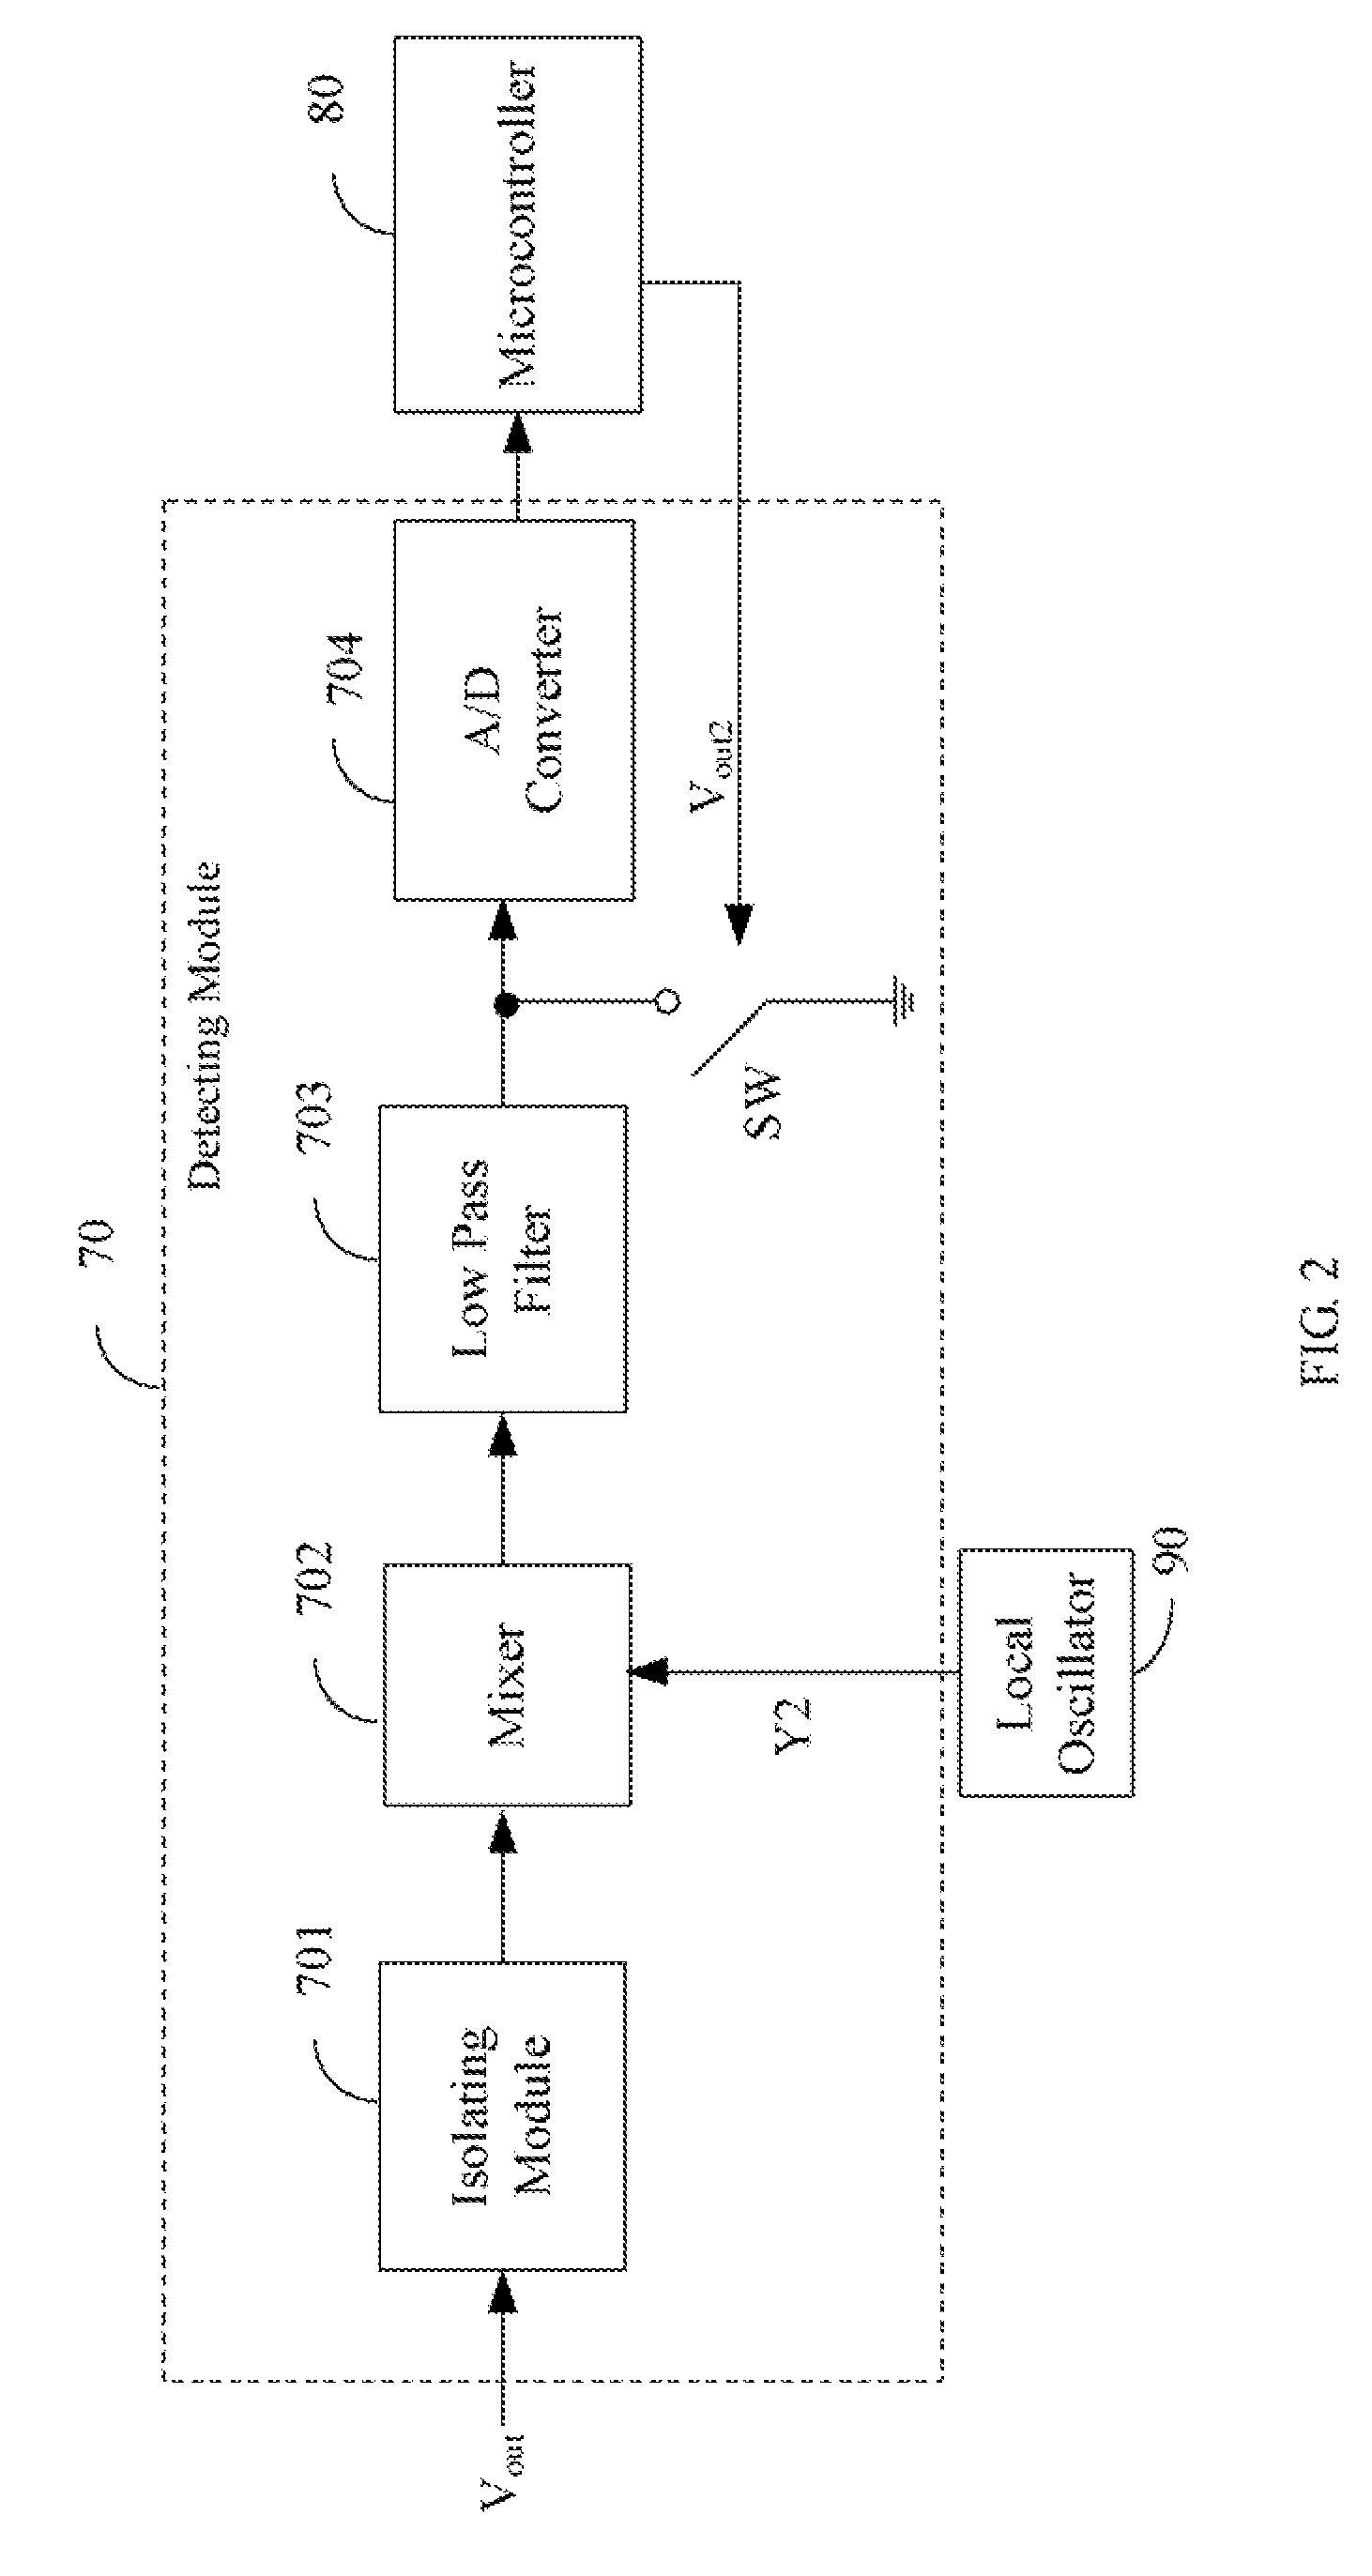 Circuit for canceling DC offset in a communication system